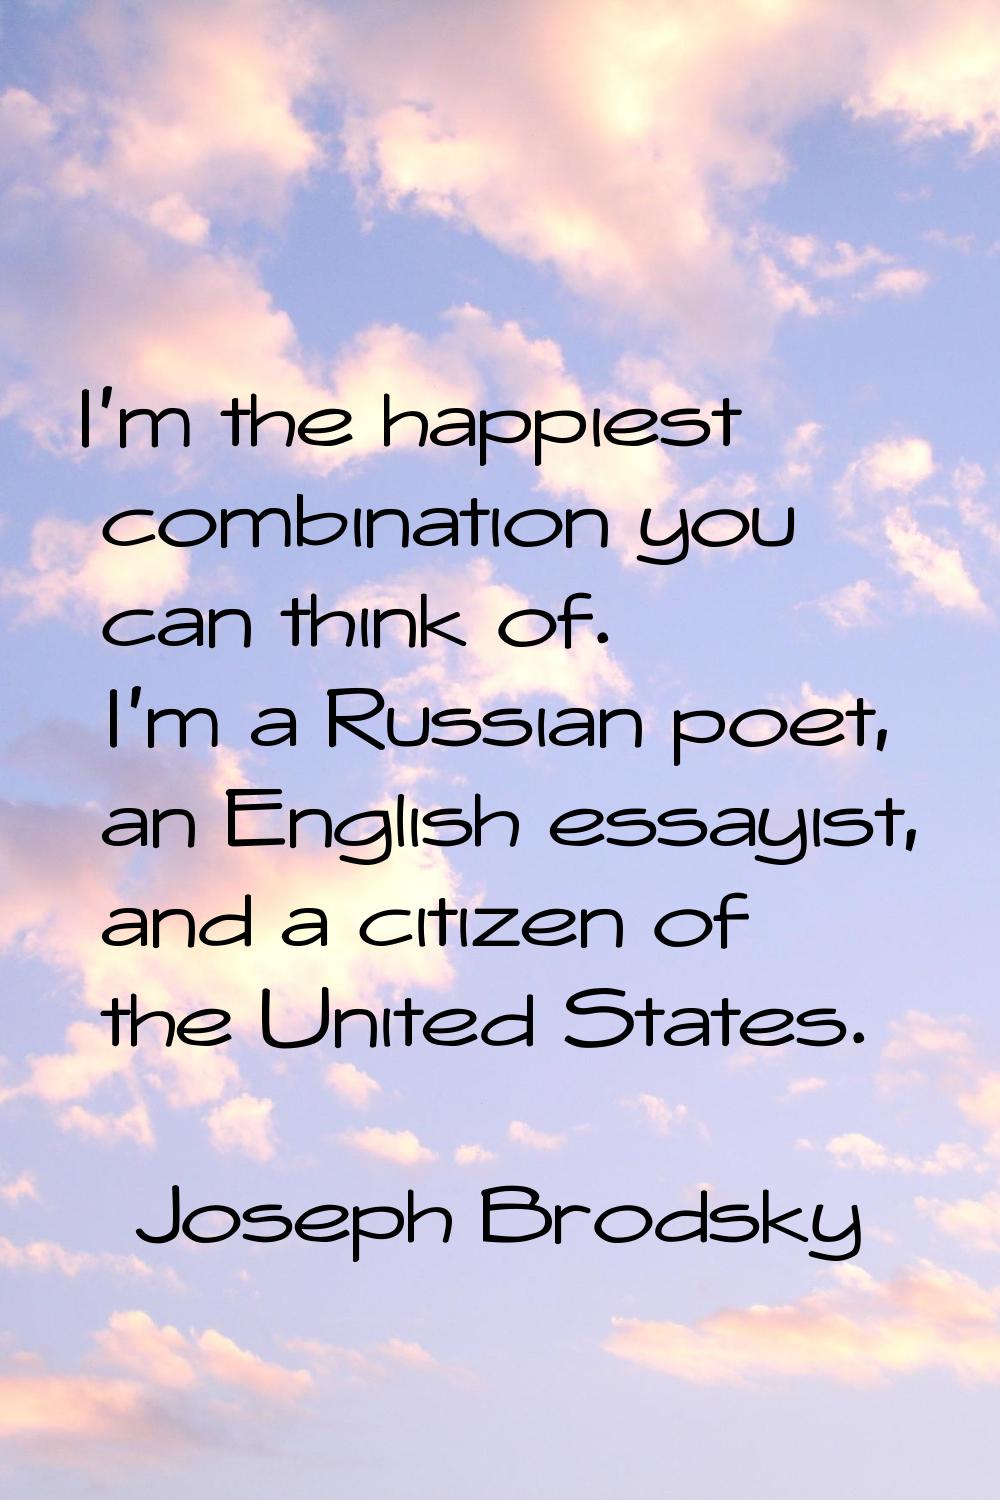 I'm the happiest combination you can think of. I'm a Russian poet, an English essayist, and a citiz